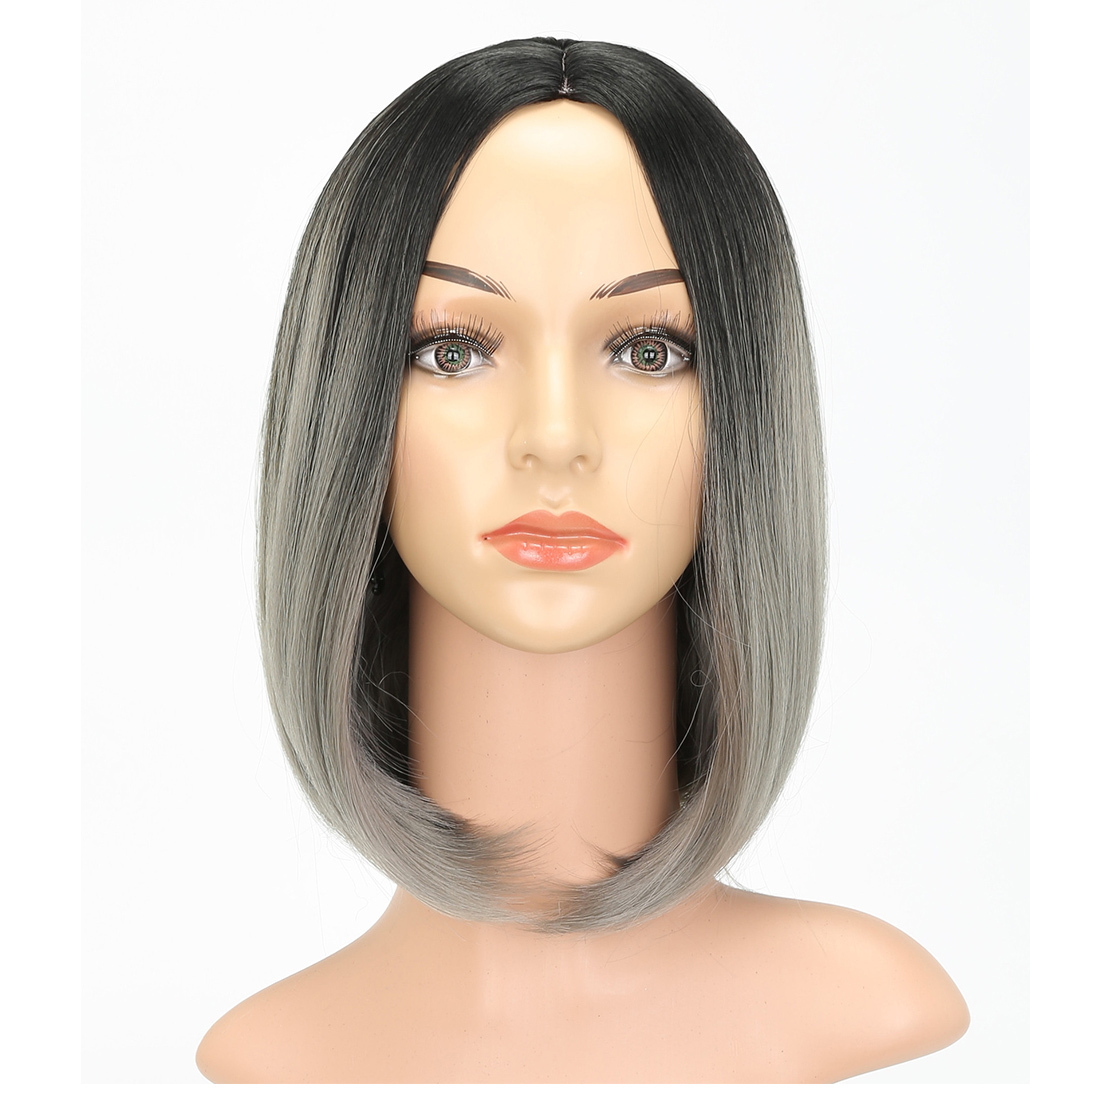 Short Bob Wigs For Women Synthetic Hair Heat Resistant Black to Gray 12inches - $15.00